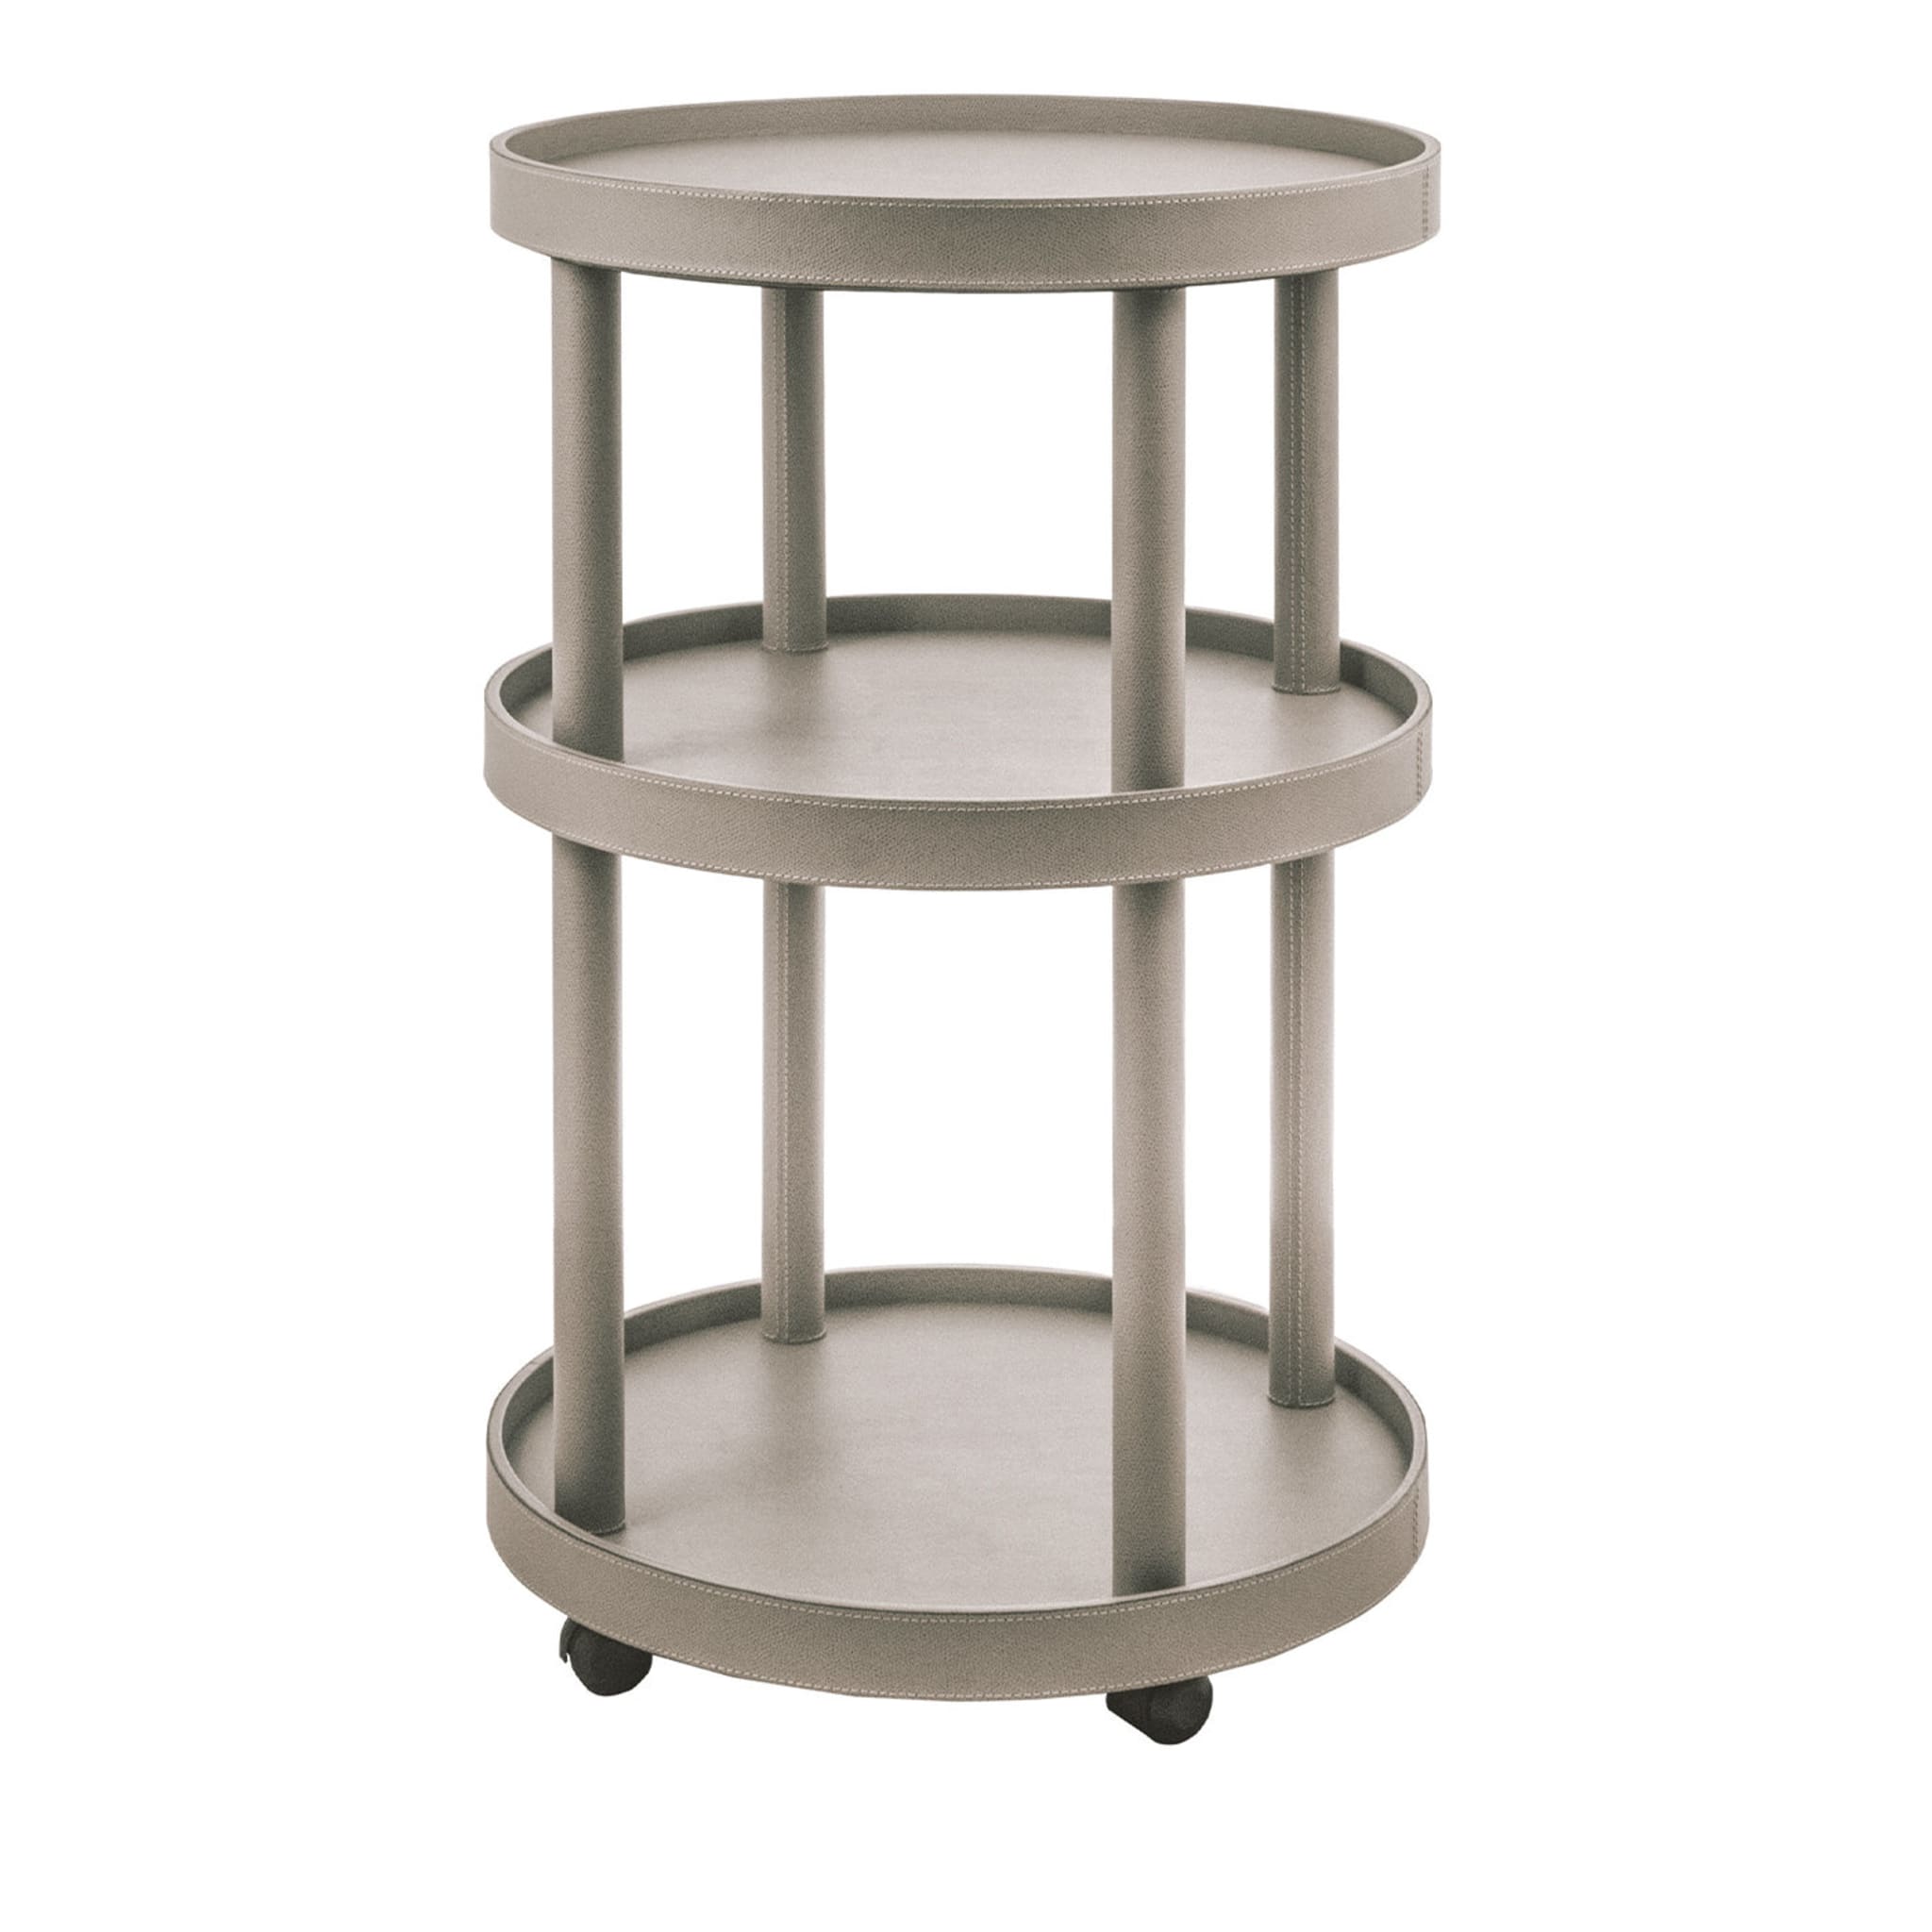 Polo Trolley 3-Tier Beige Round Table - Main view